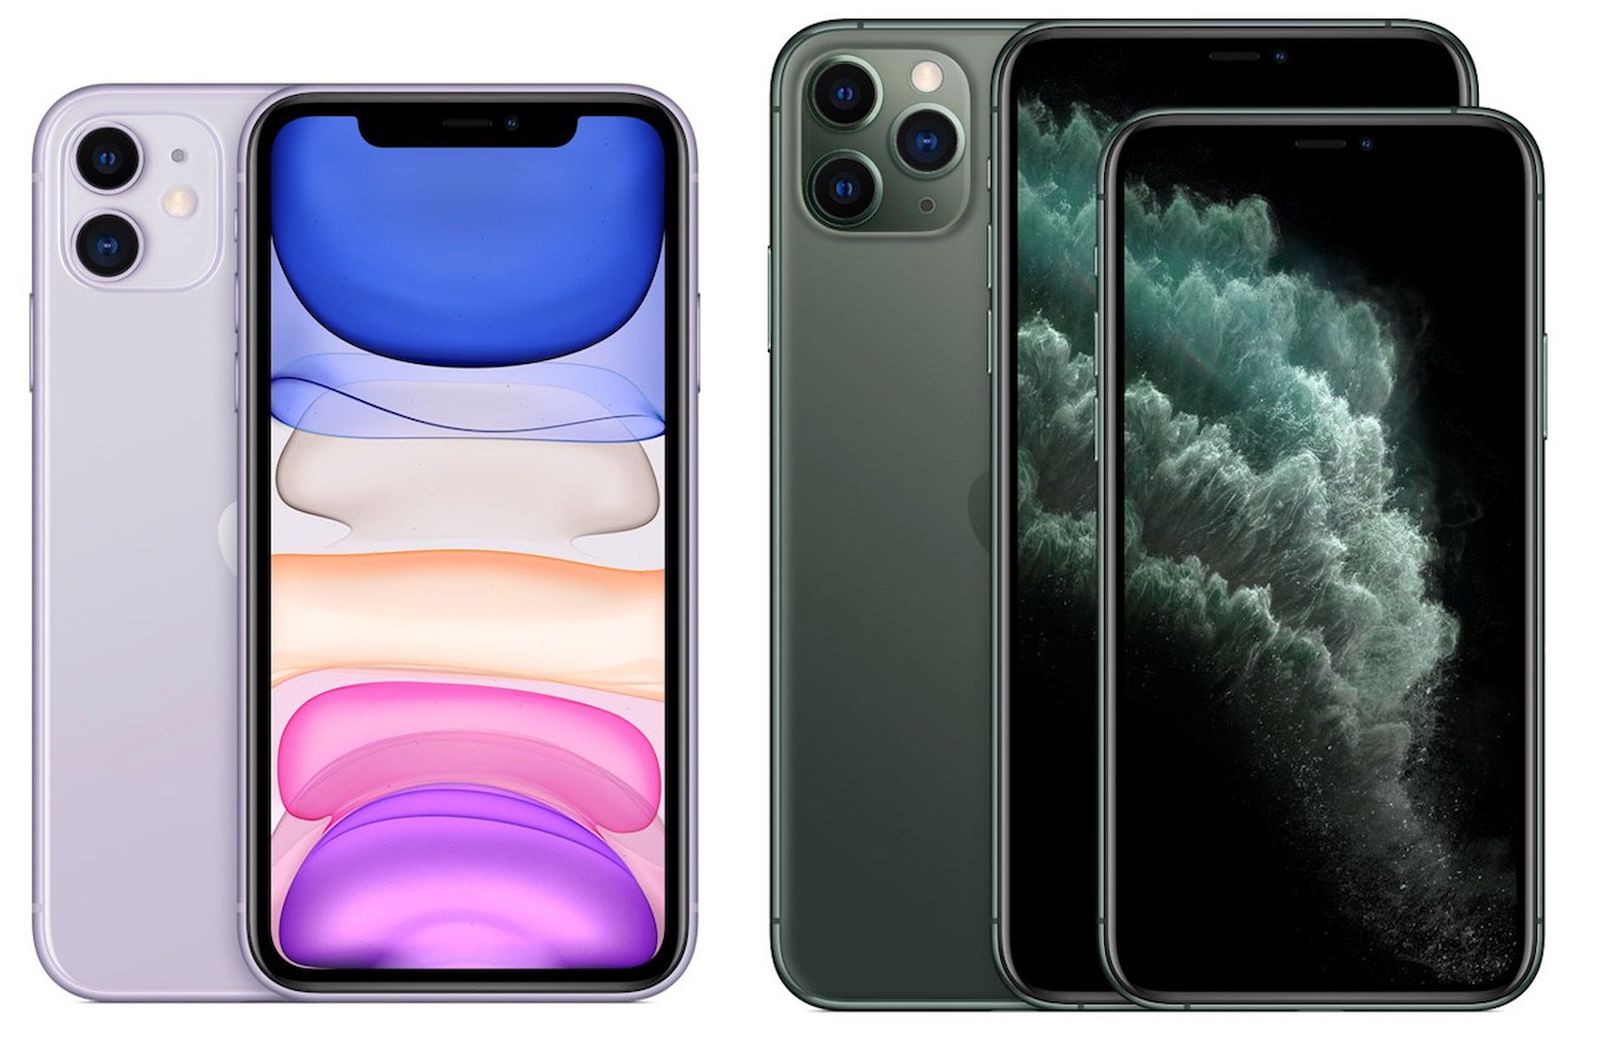 Predecessor Of IPhone 11: Identifying The Previous Model Released Before IPhone 11